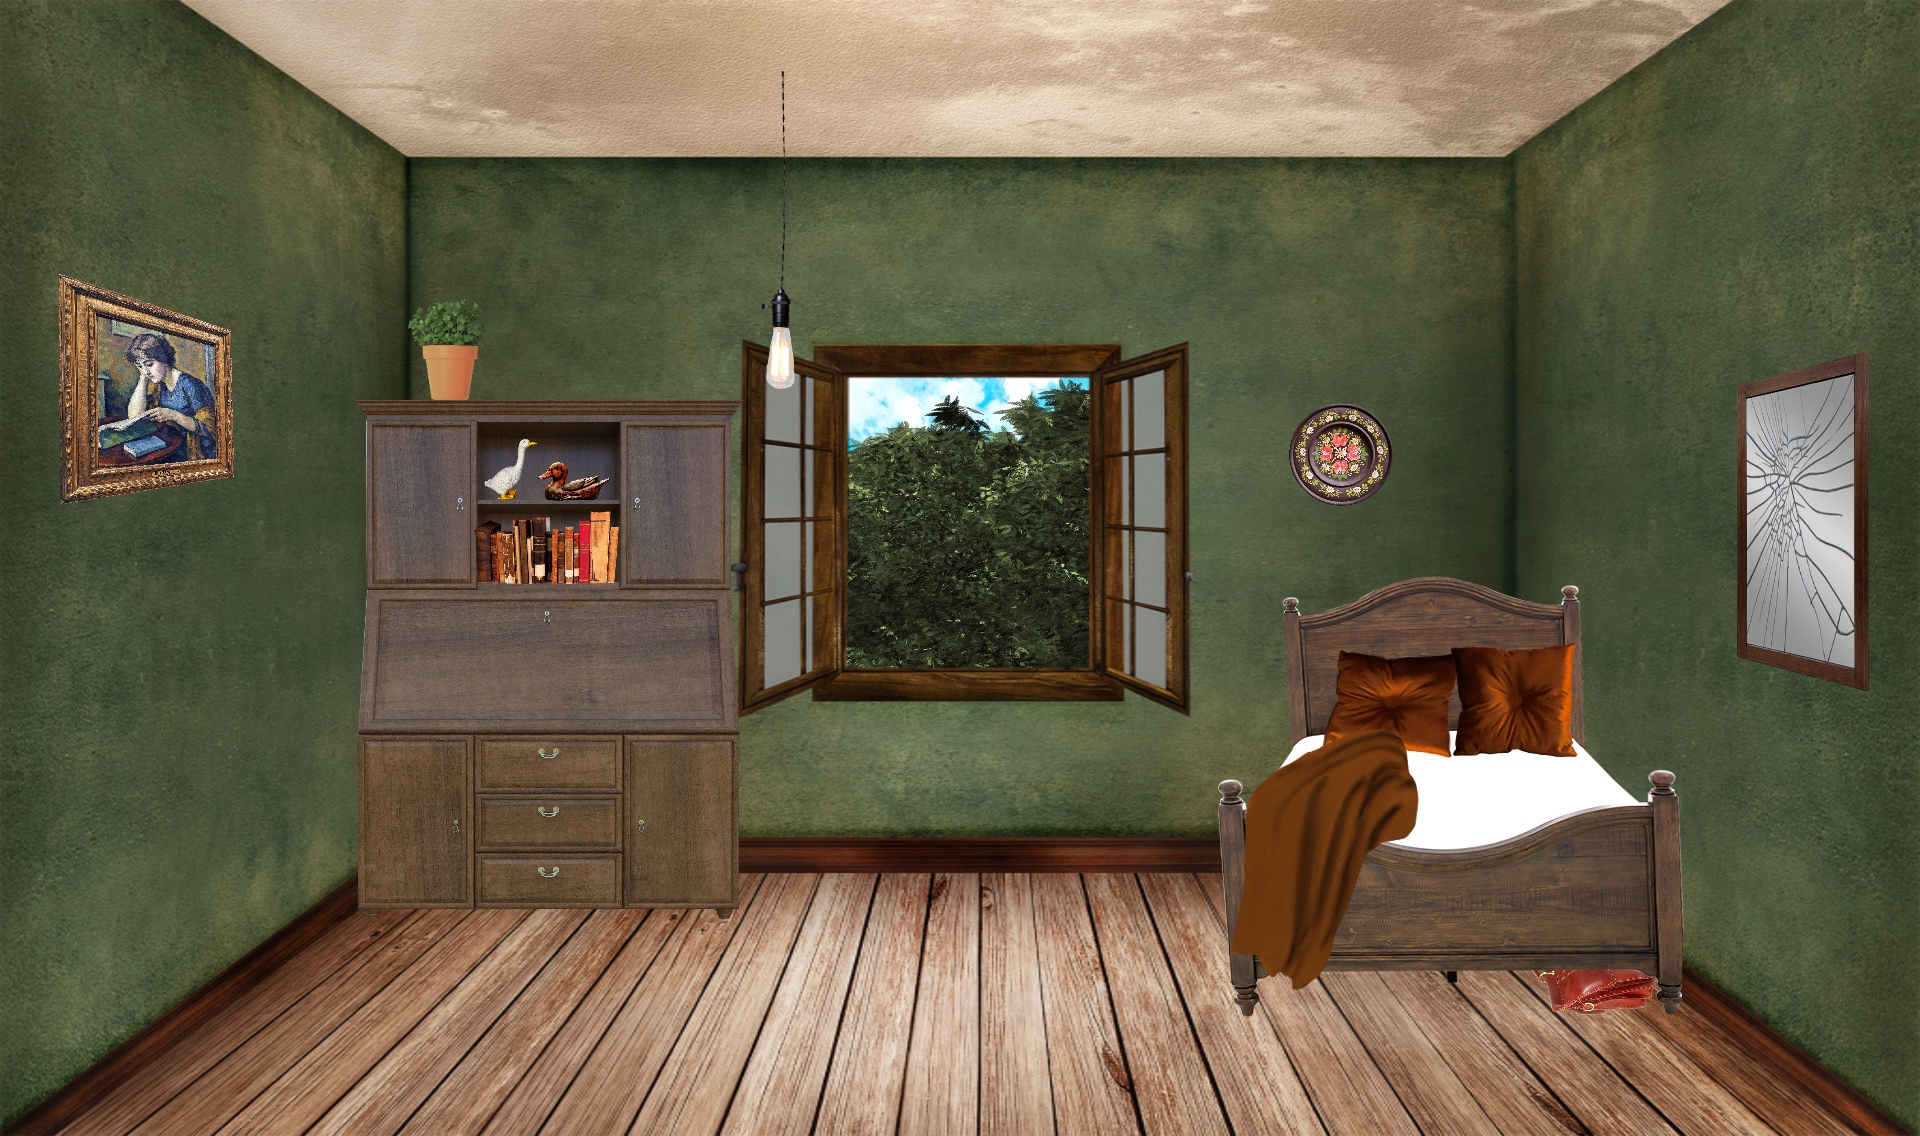 INT. HOME ALONE BEDROOM BROWN – DAY